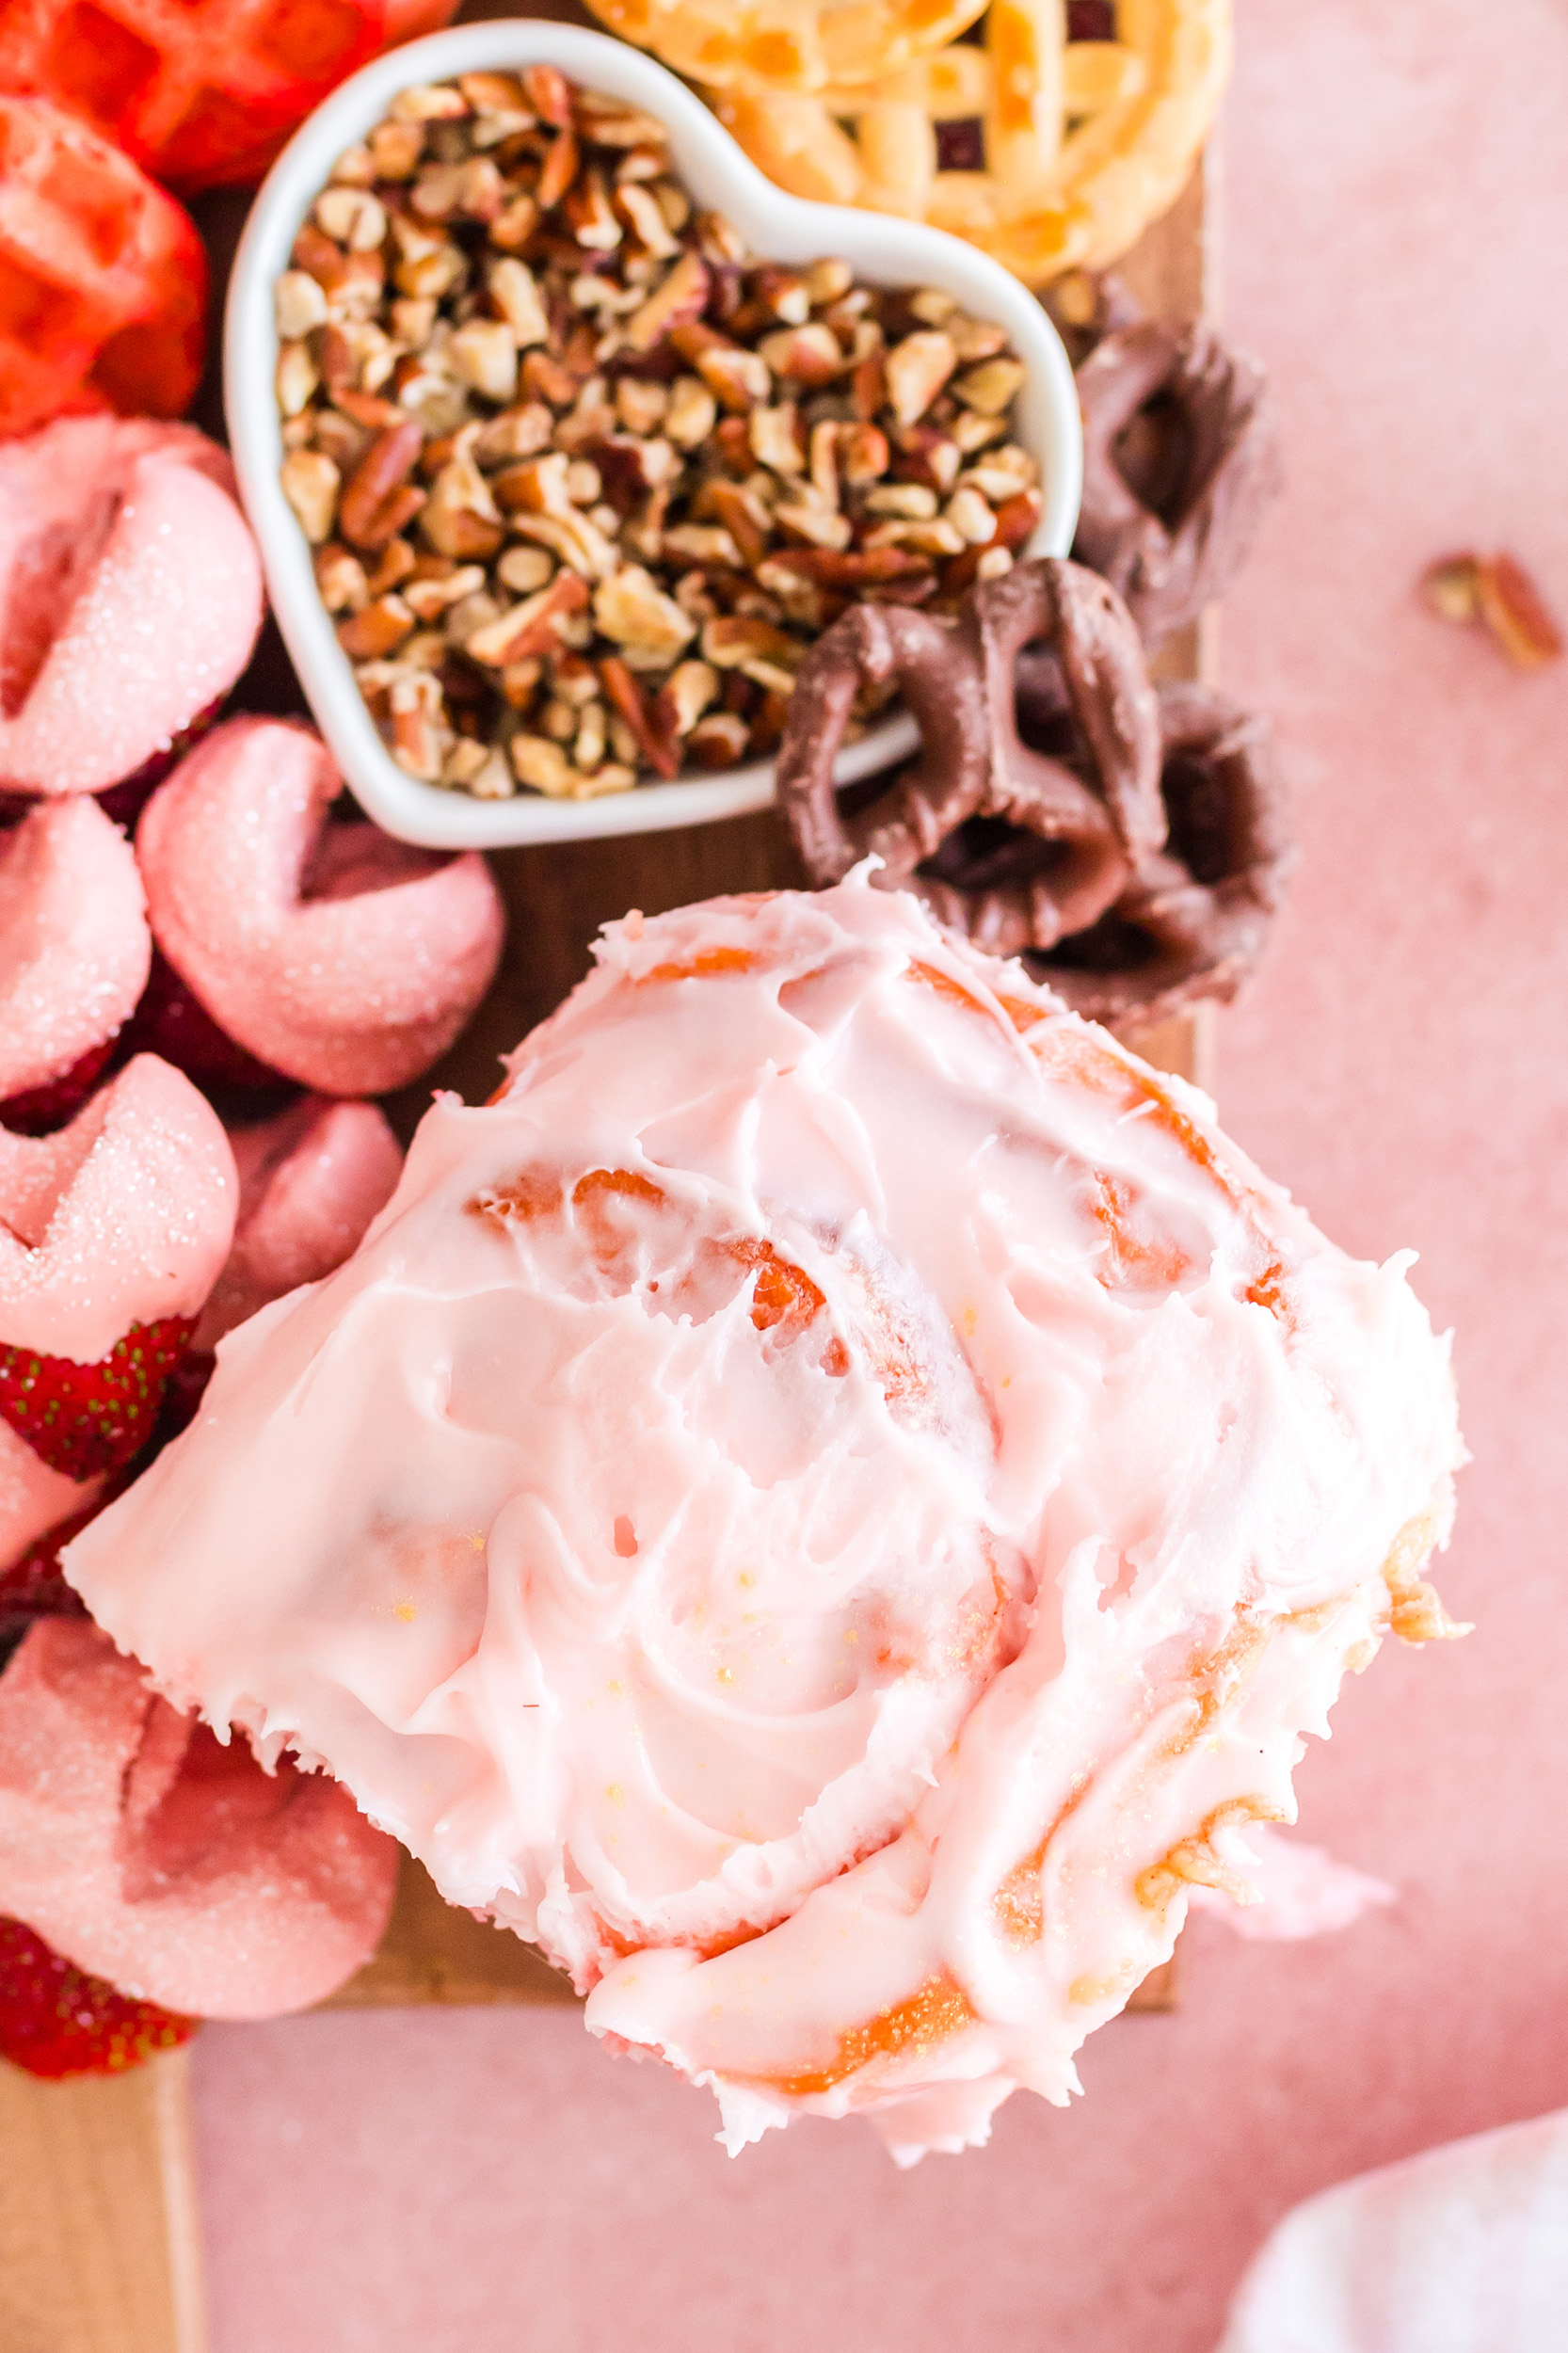 strawberry cinnamon roll on a board with other sweets and breakfast treats